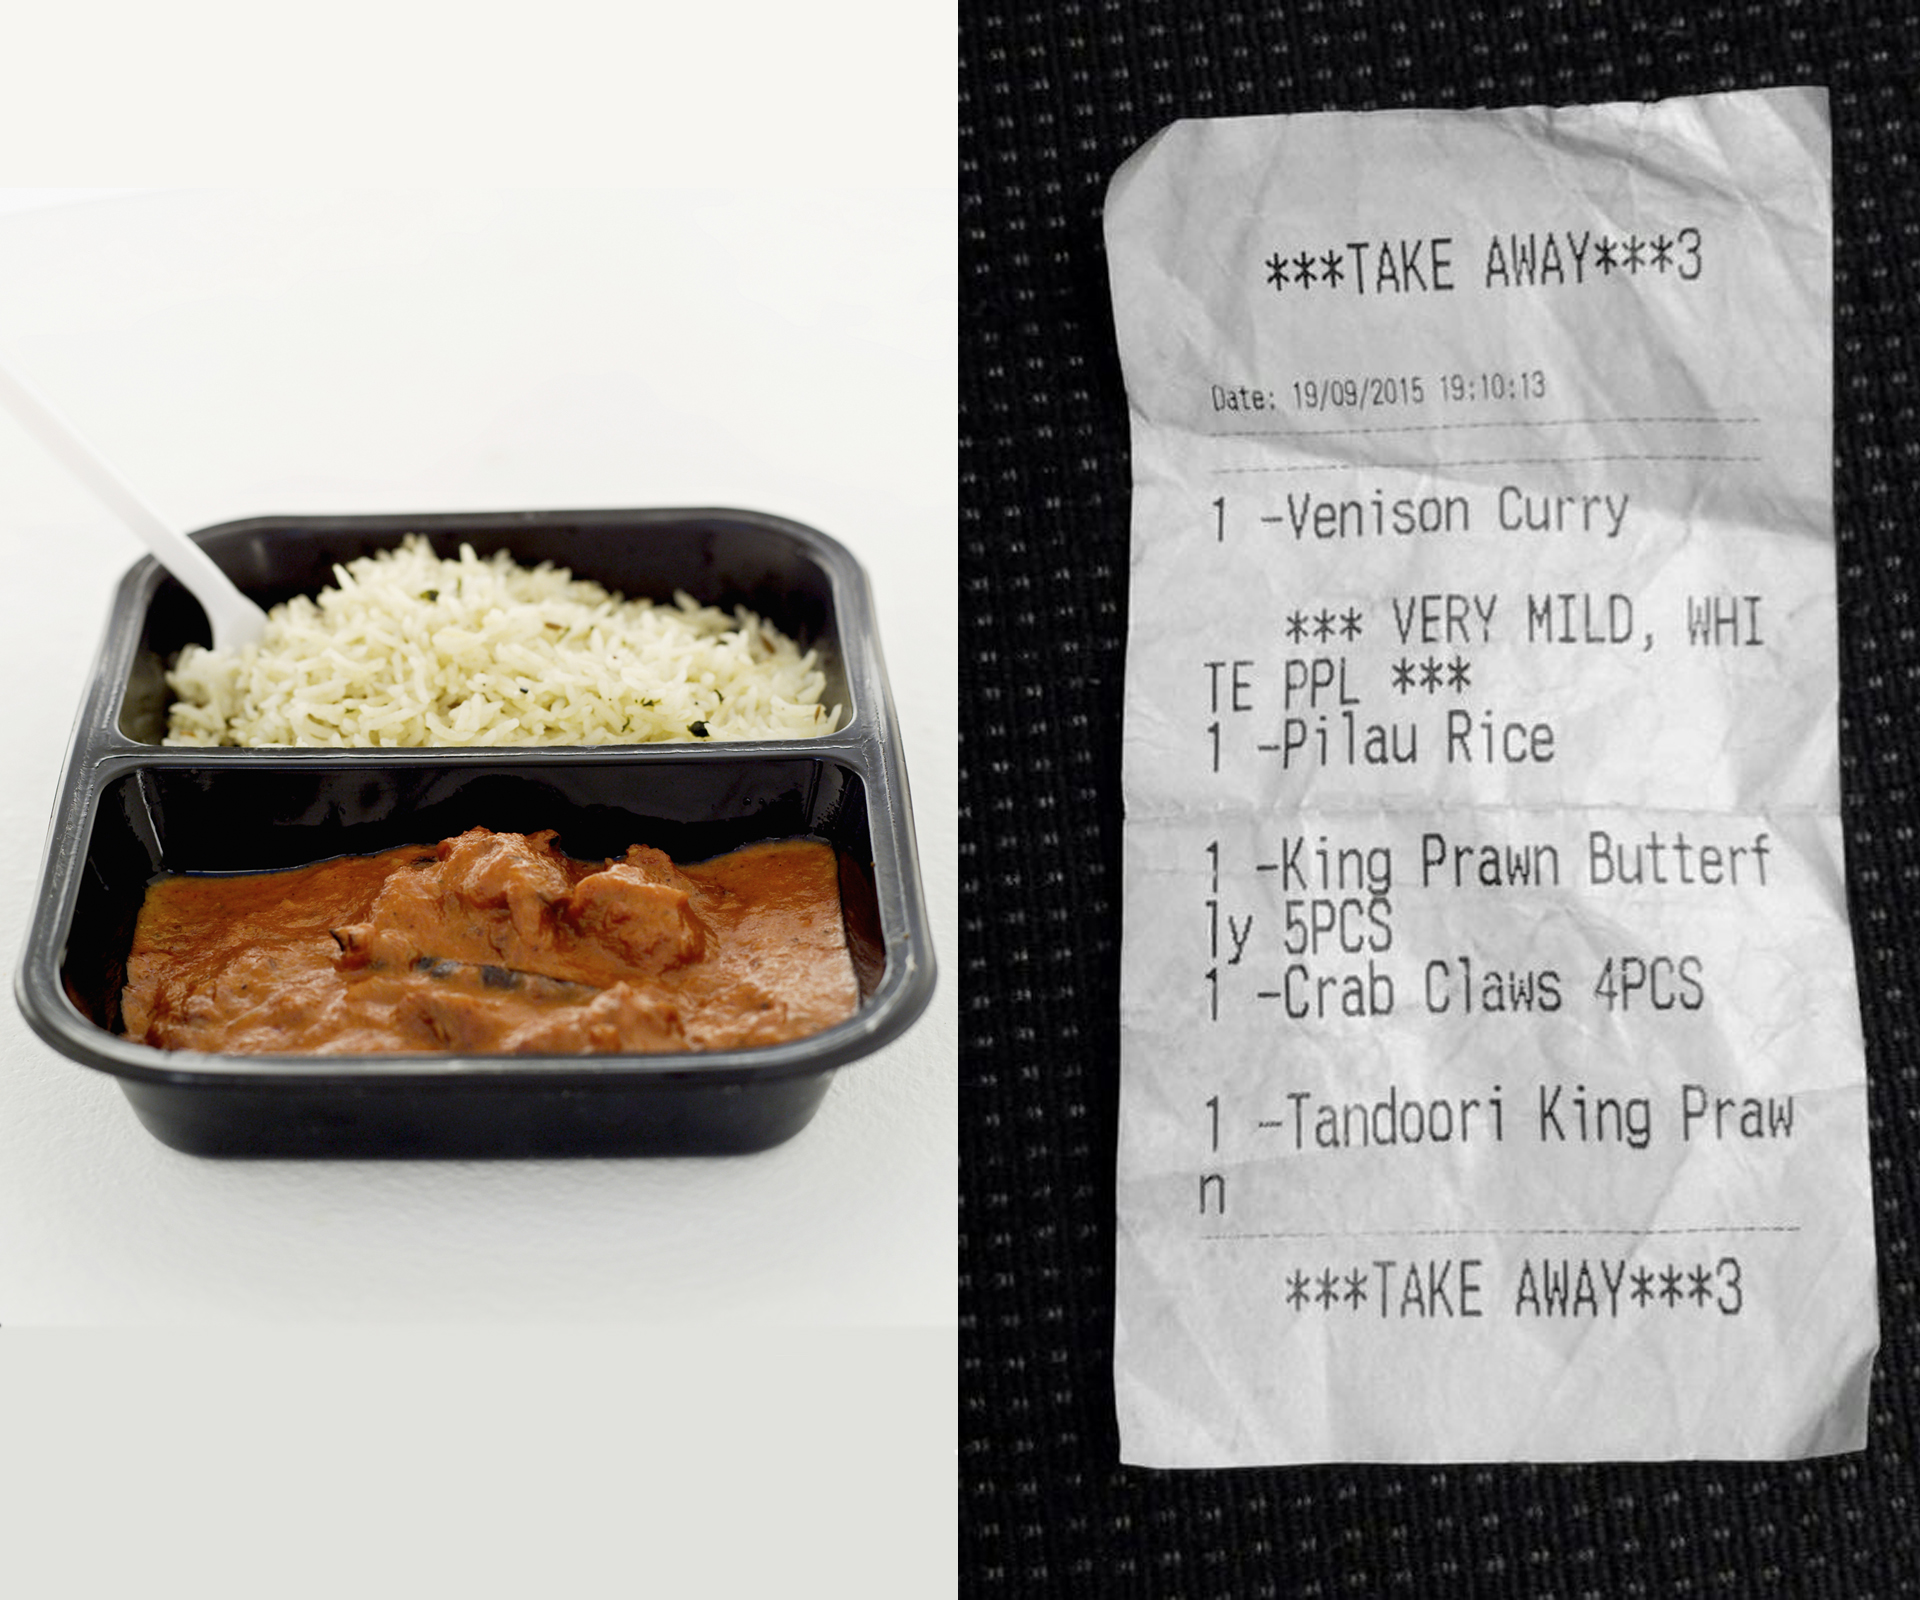 Restaurant-goer angered after discovering ‘WHITE PPL’ note on mild curry receipt